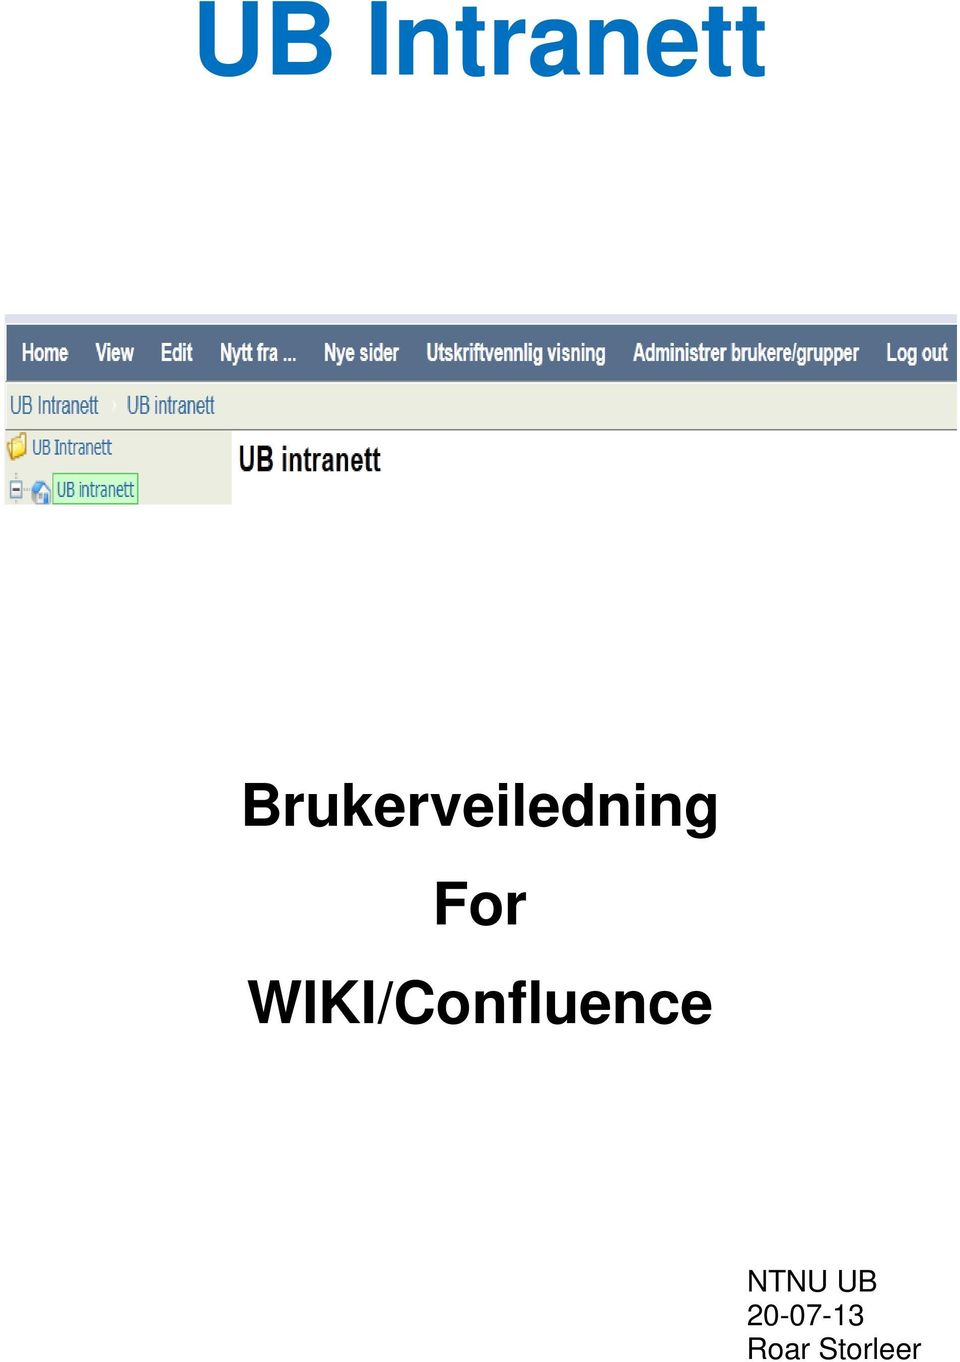 For WIKI/Confluence